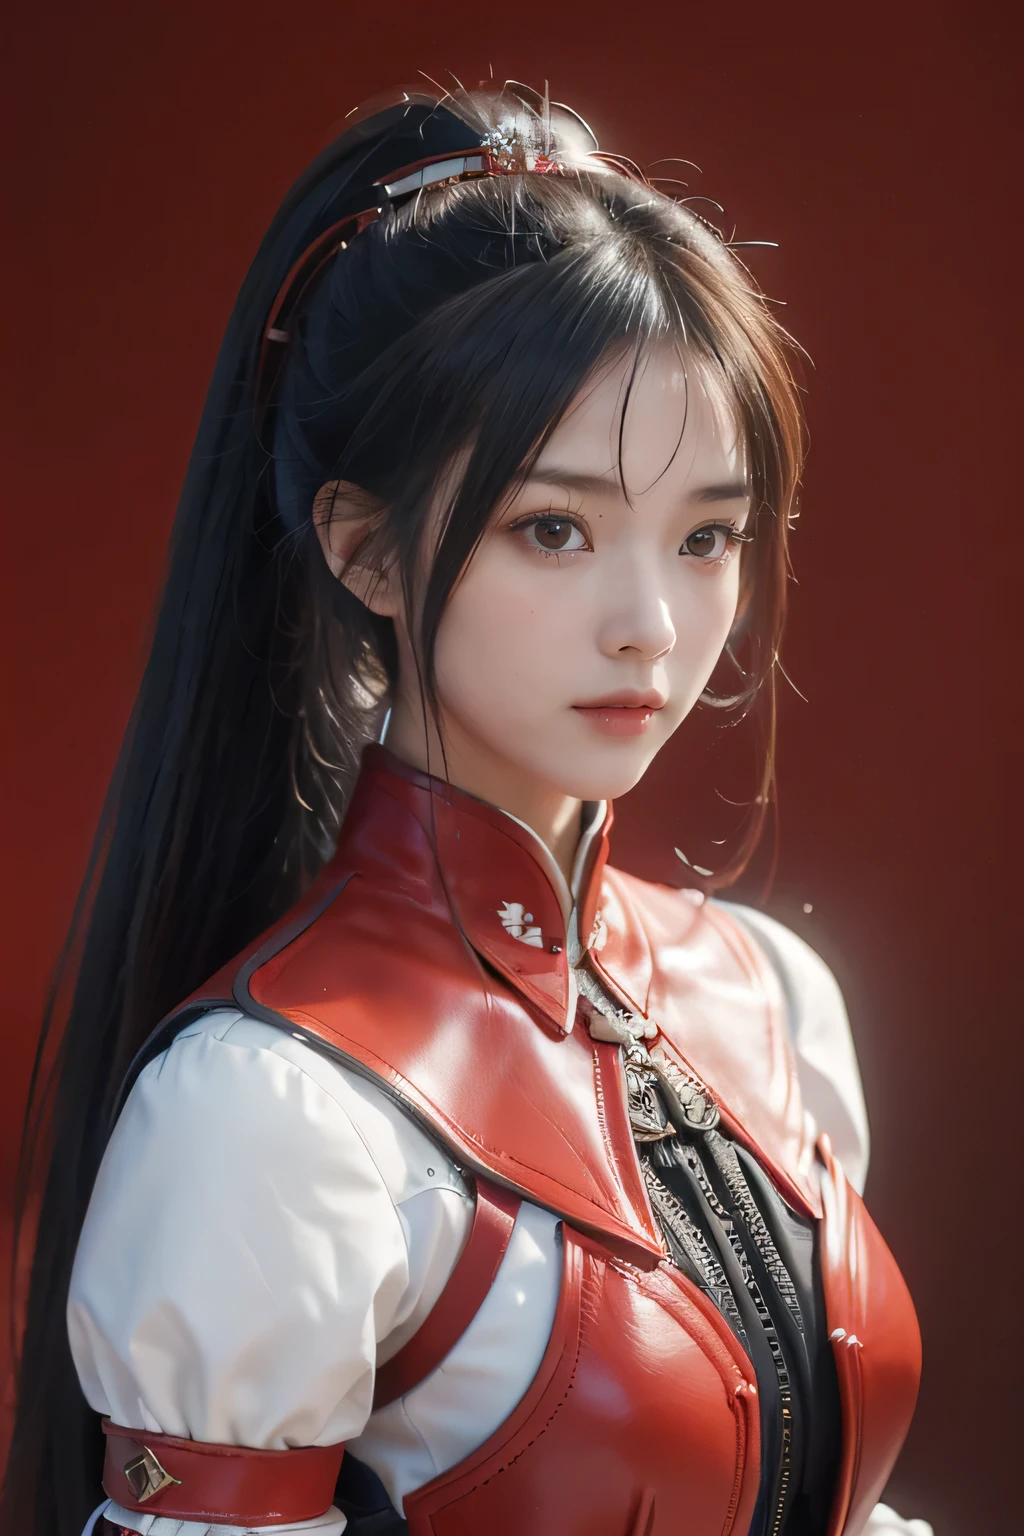 masterpiece，Best quality，A high resolution，8K，，((Head close-up))，Original photo，real photo，Forest Background（（Field background）），digital photography，(Female generals on the battlefield of the Han Dynasty)，18-year-old girl，（long ponytail hairstyle)，cparted lips，Noble and charming，Elegant and serious，(Han dynasty armor，The combination of white metal and red leather，Openwork design，armure，Knight Armor，metallic  luster，Leather buckle，Cool and gorgeouig breasts))，Chest groove，Three Kingdoms character painting style，Photo pose，oc render reflection texture，Bright colors，Facing the camera，Body facing the camera